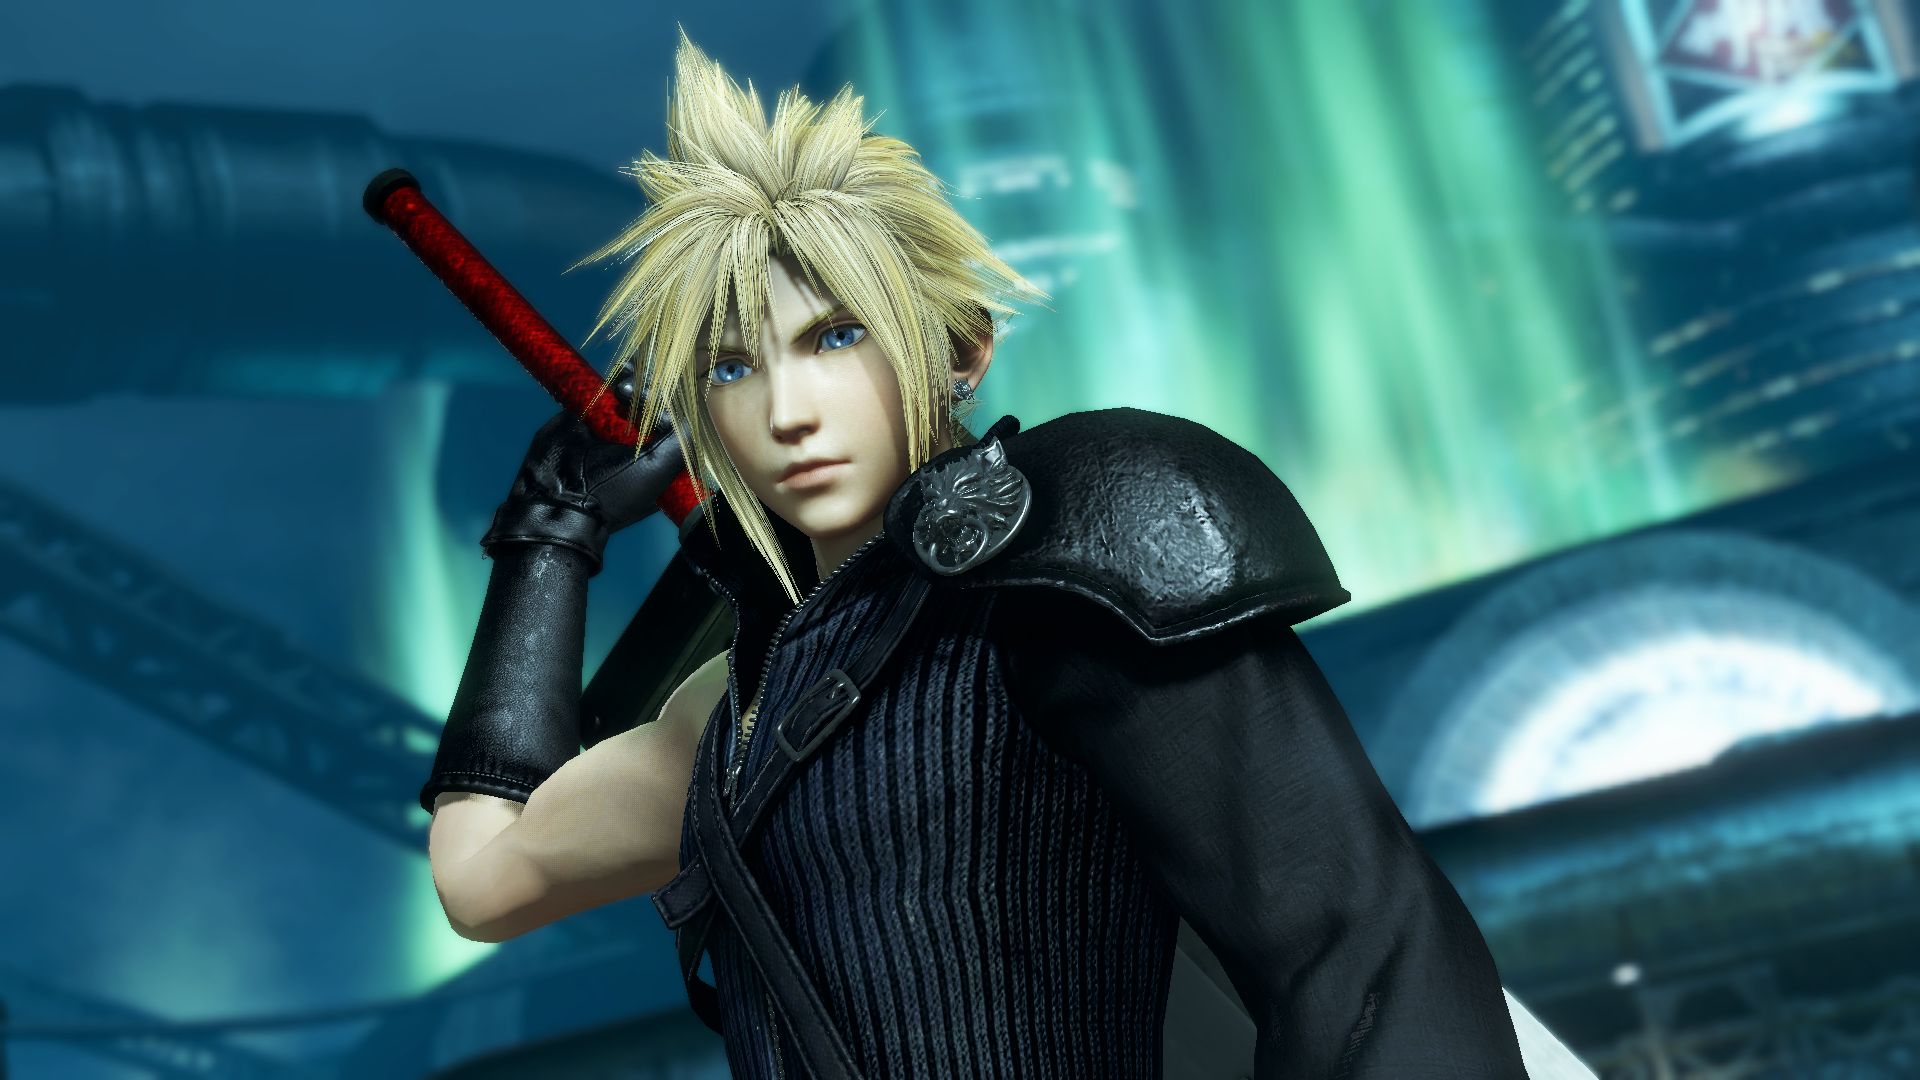 Dissidia Final Fantasy Nt Gets New Screenshots Showing Story And More